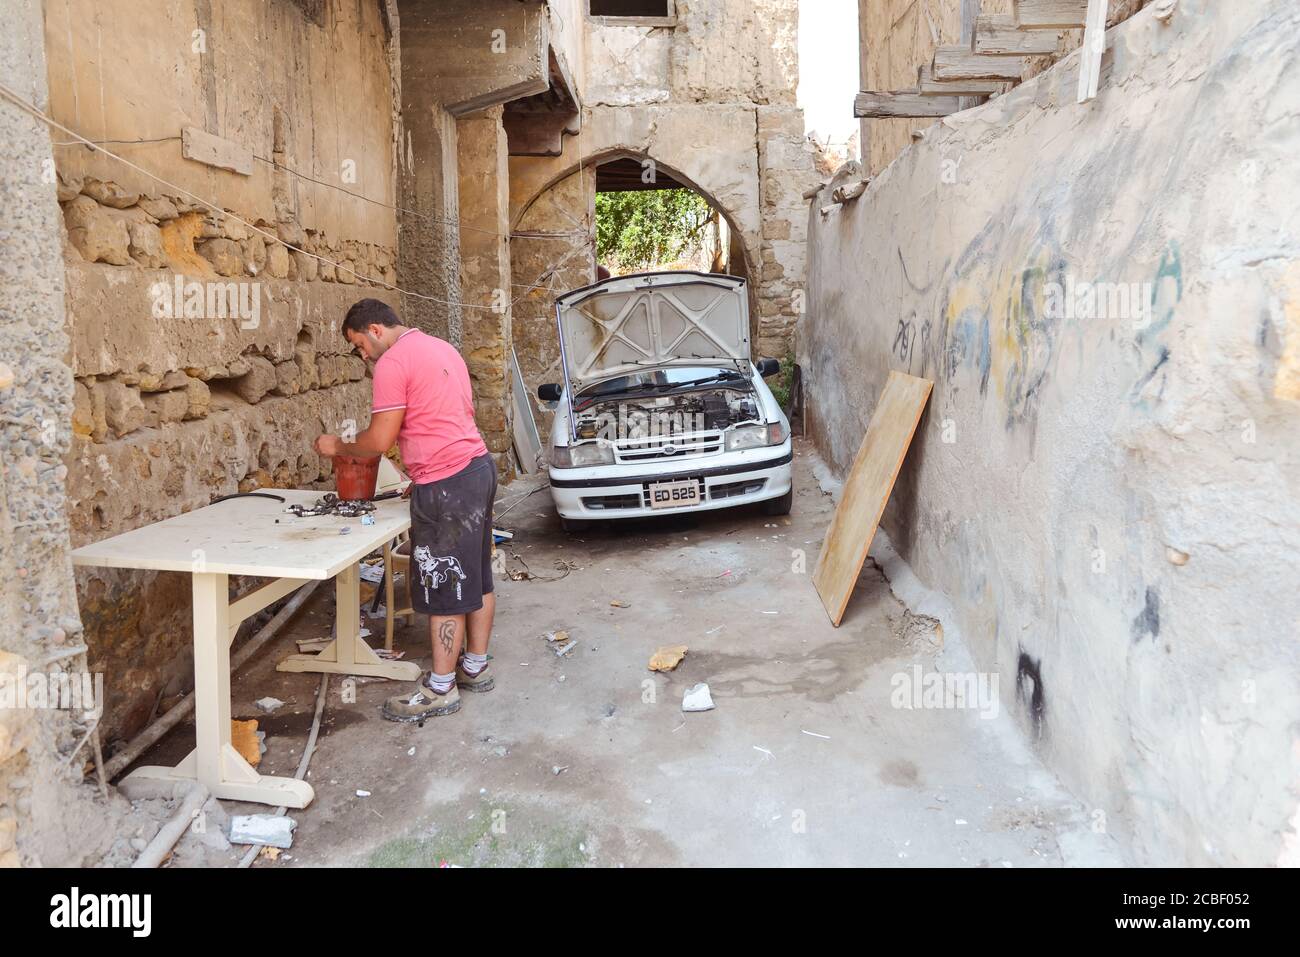 Nicosia / Northern Cyprus - August 15, 2019: man repairing car in alley on Turkish side of Nicosia belonging to North Cyprus Stock Photo